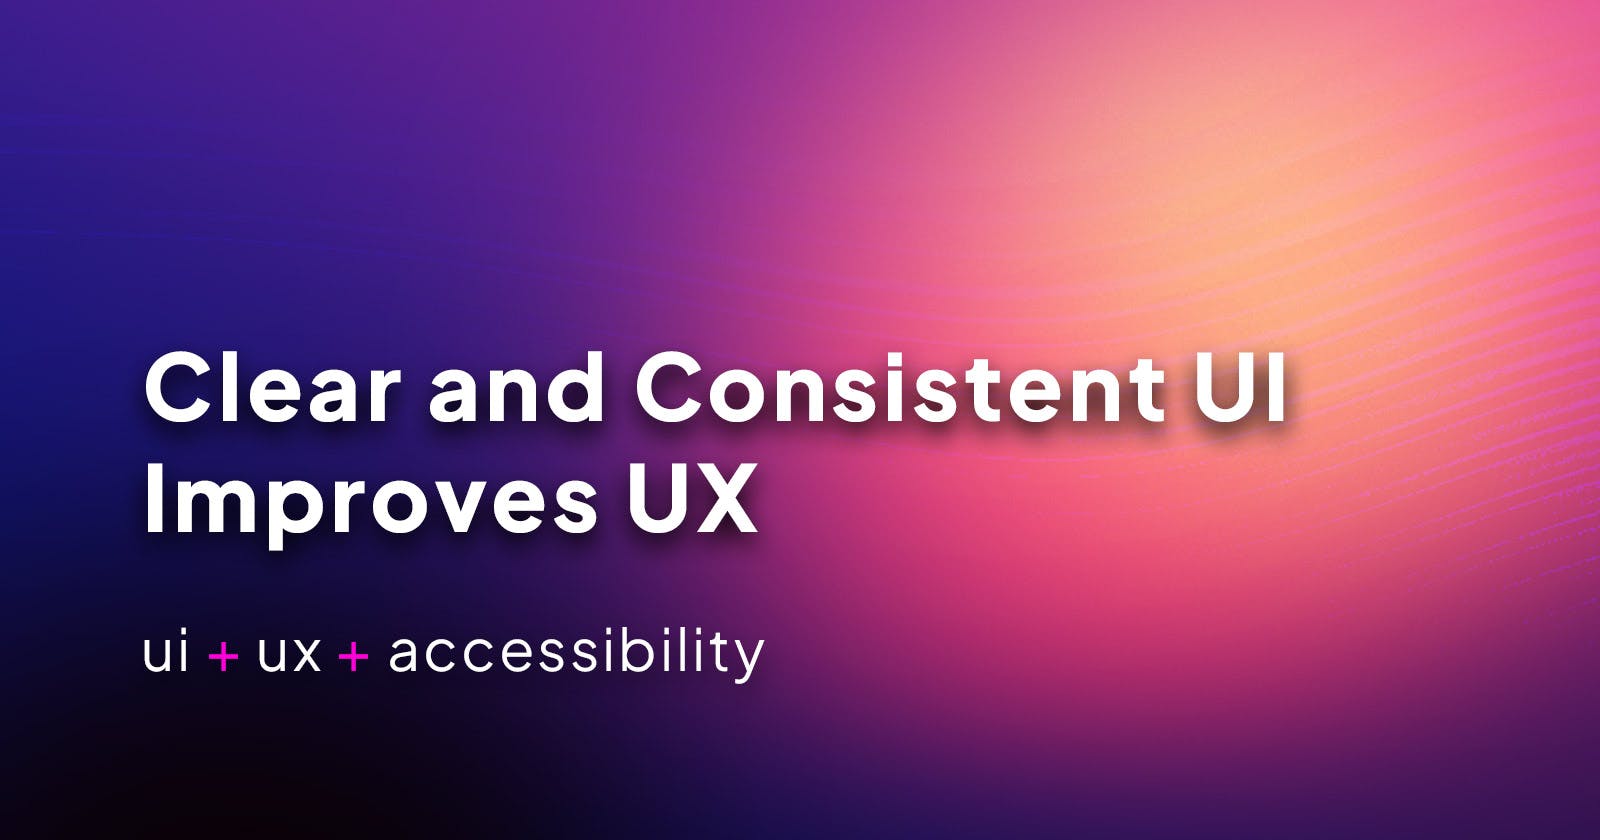 Clear and Consistent UI Improves UX